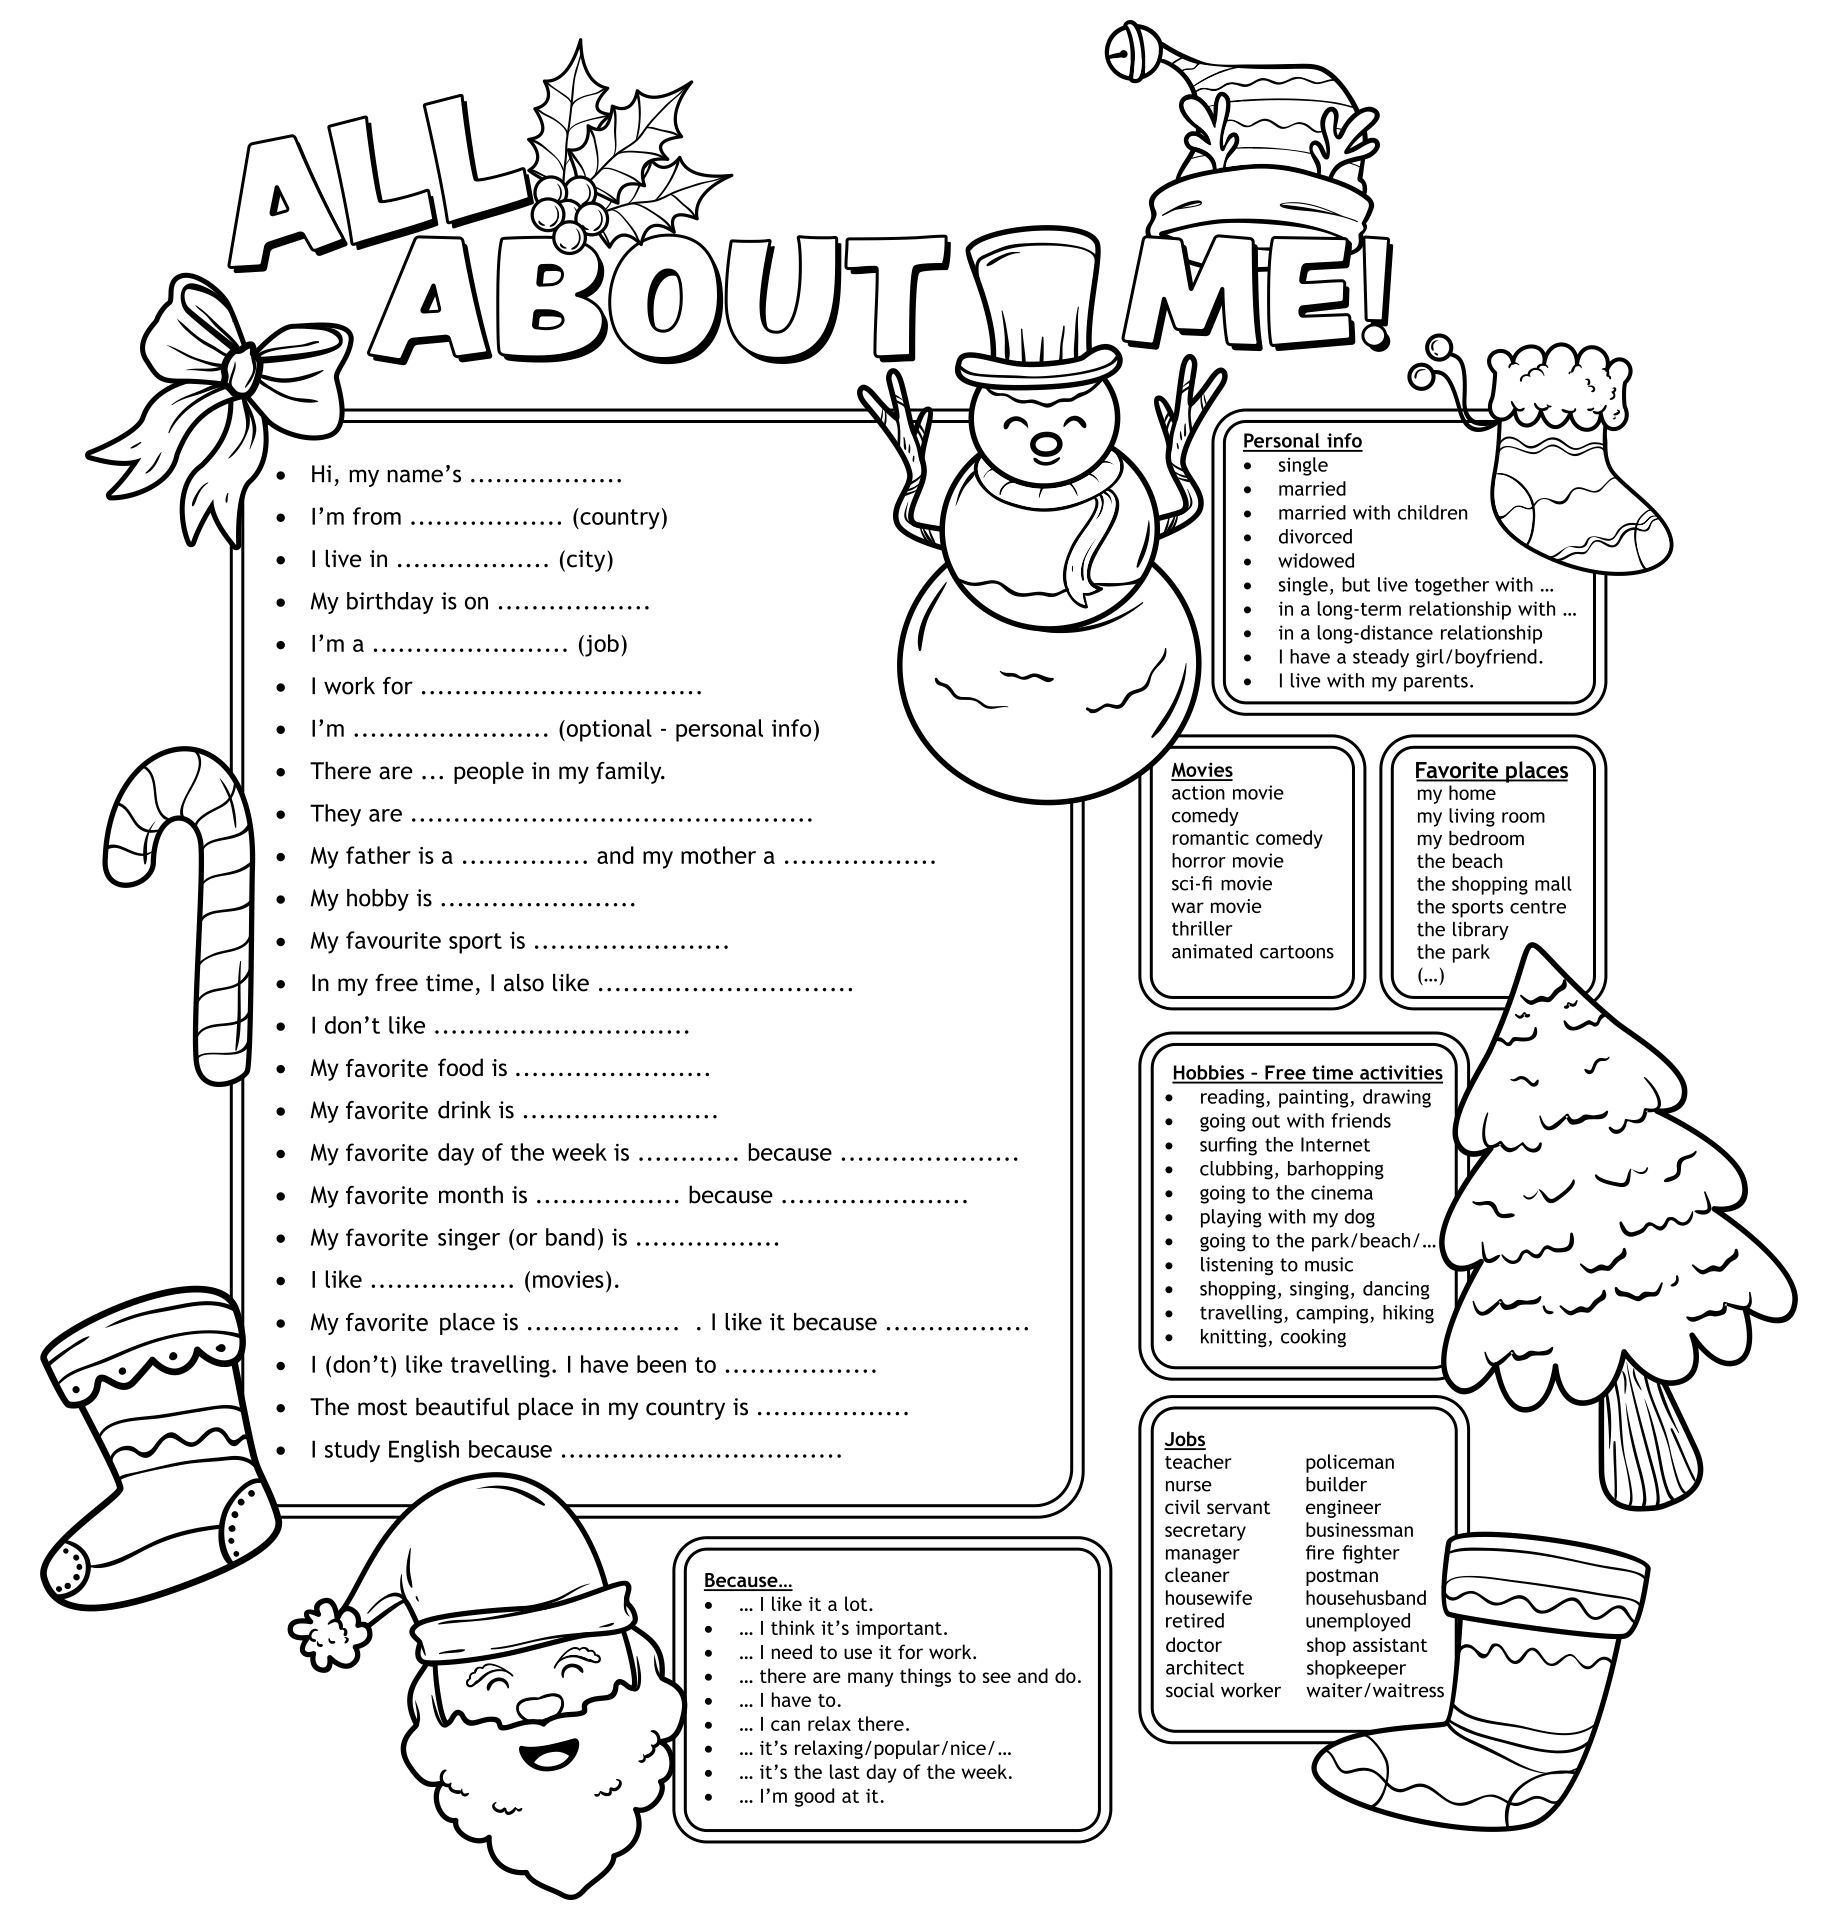 christmas-activity-book-printable-free-here-we-are-back-with-a-new